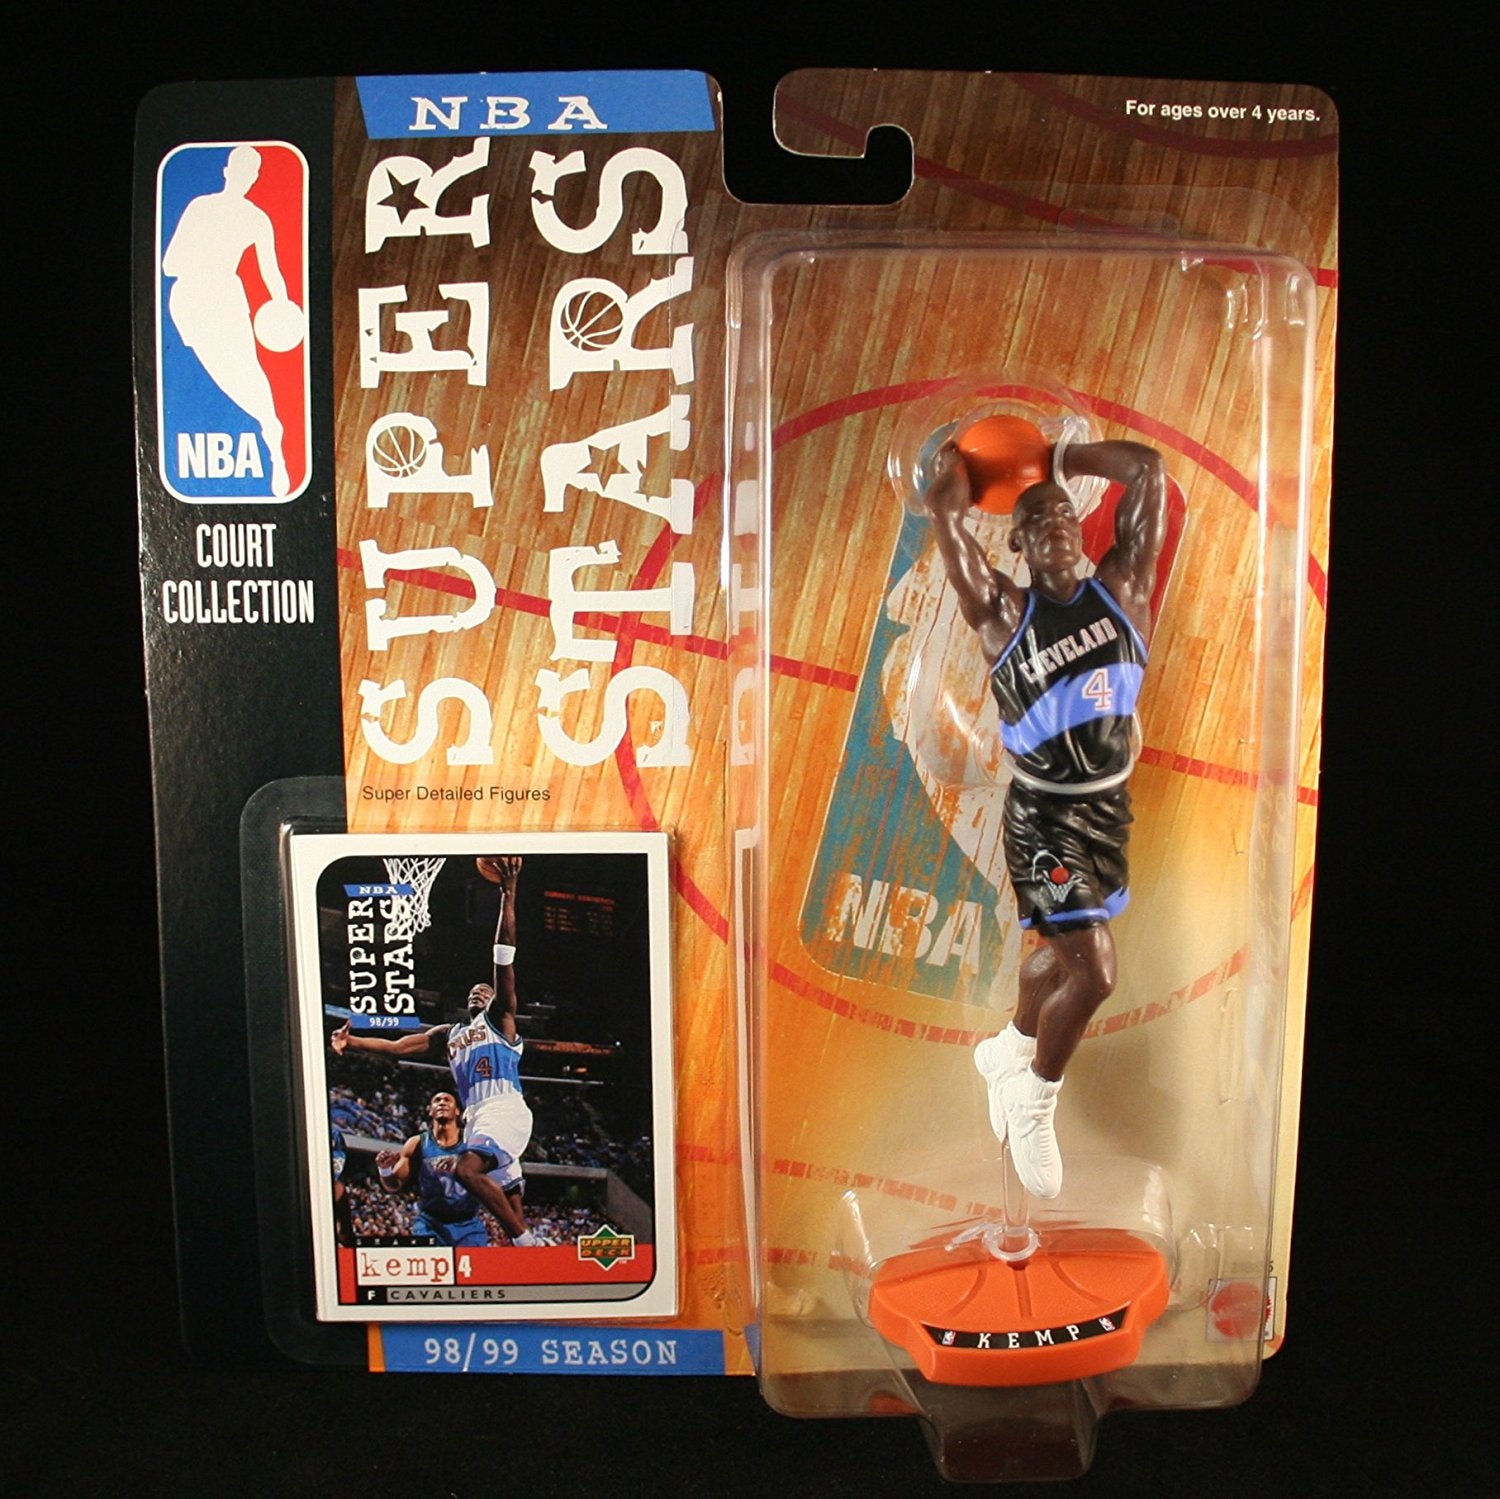 SHAWN KEMP / CLEVELAND CAVALIERS * 98/99 Season * NBA SUPER STARS Super Detailed Figure, Display Base & Exclusive Upper Deck Collector Trading Card